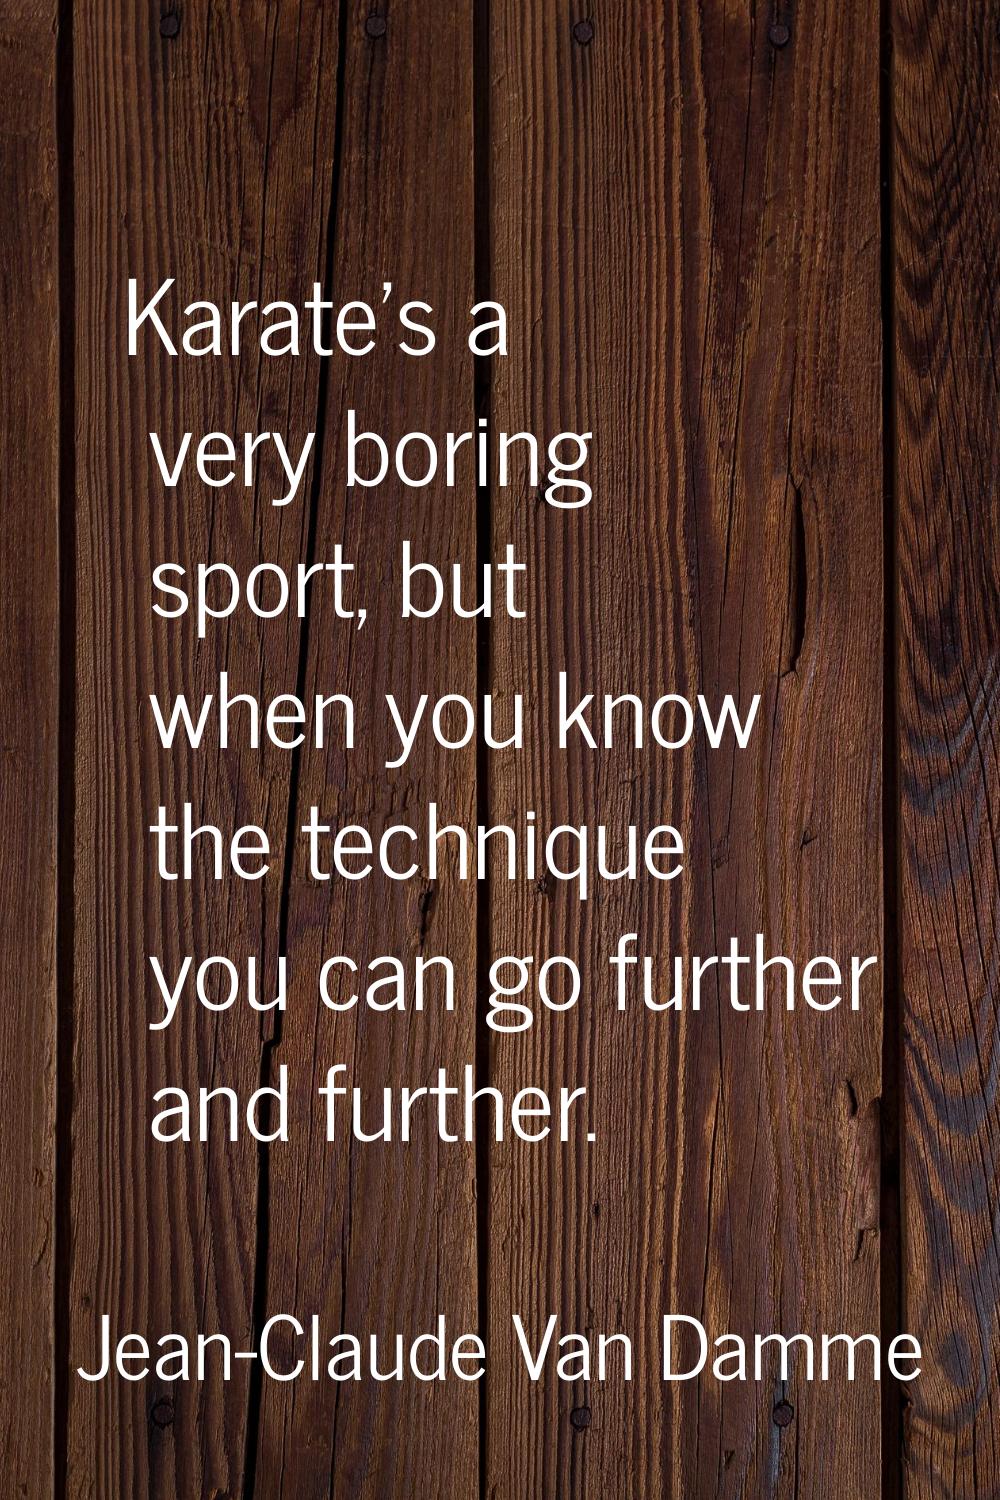 Karate's a very boring sport, but when you know the technique you can go further and further.